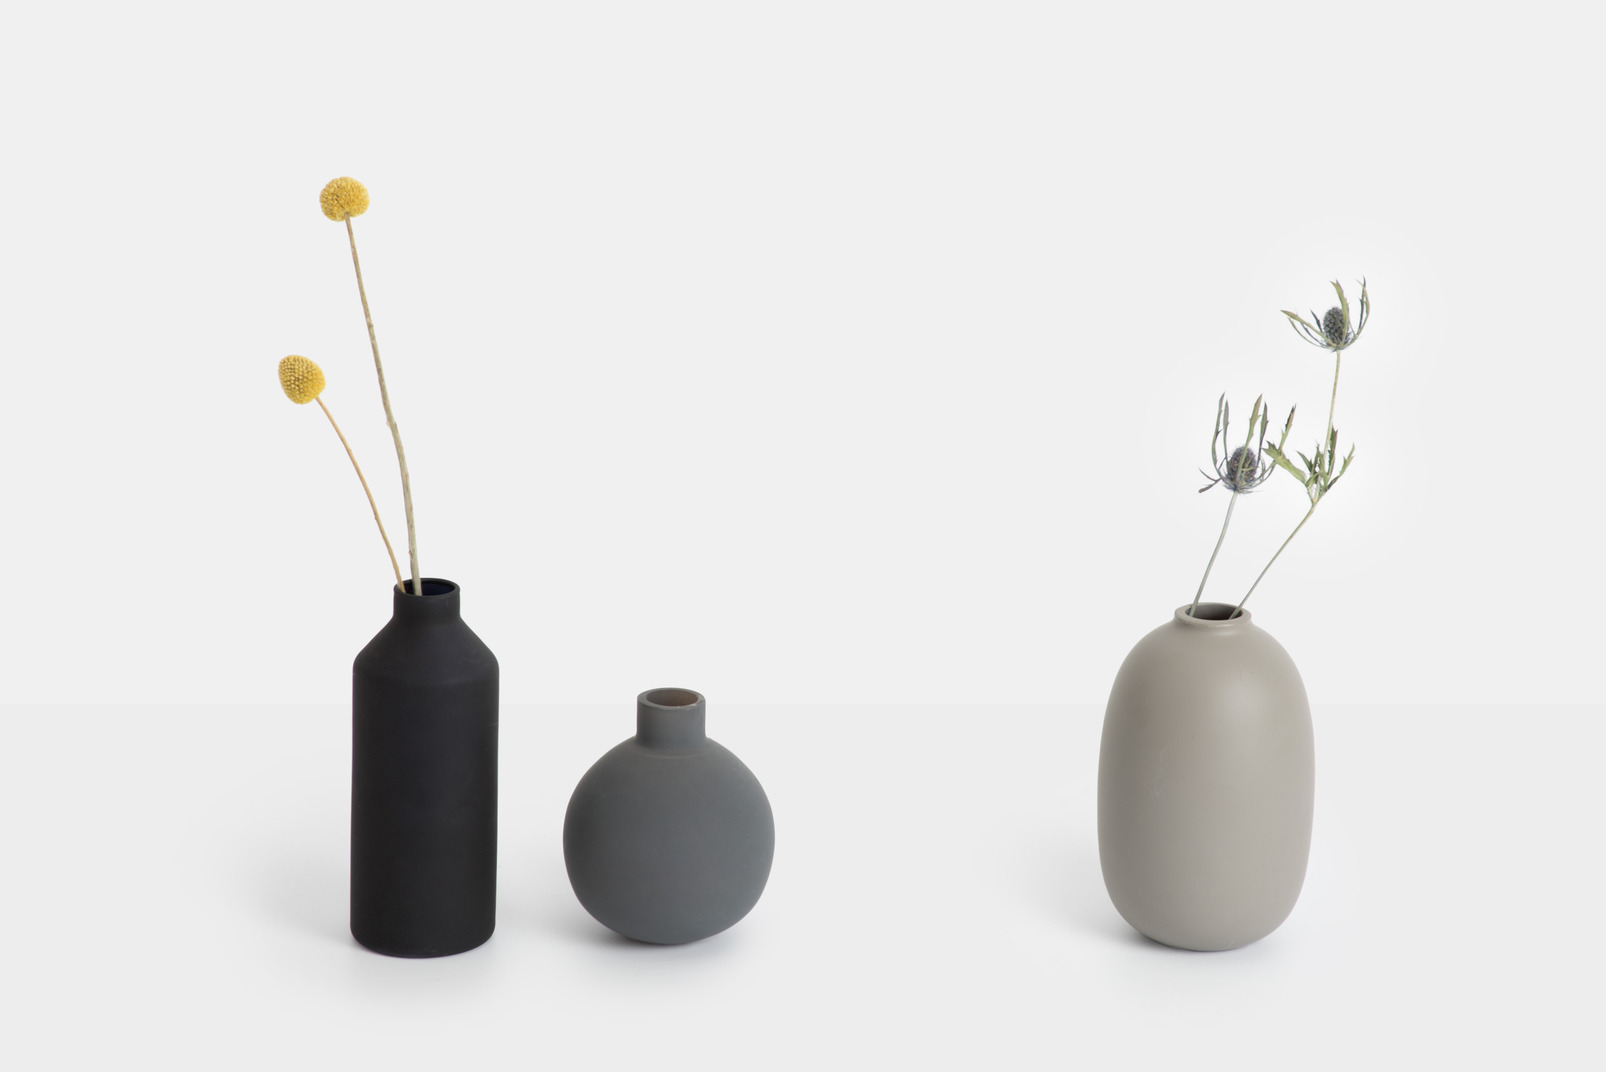 Three ceramic vases with dried flowers